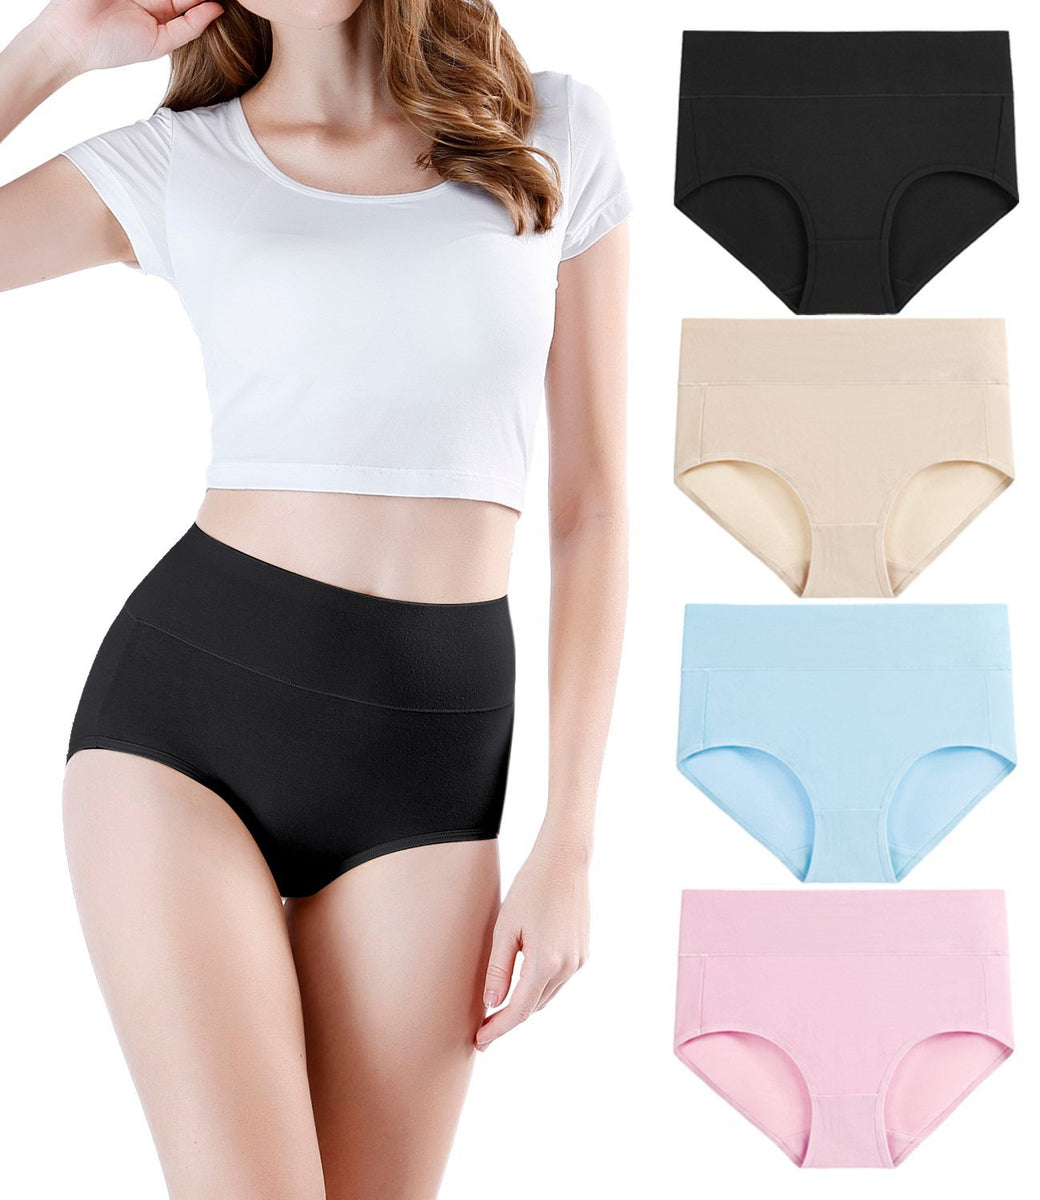 Buy Adira, Cotton Underwear For Women, High Waist panty with Full Coverage, Inside Elastic - No Elastic Exposure to Skin, Soft Cotton, Pack Of 6